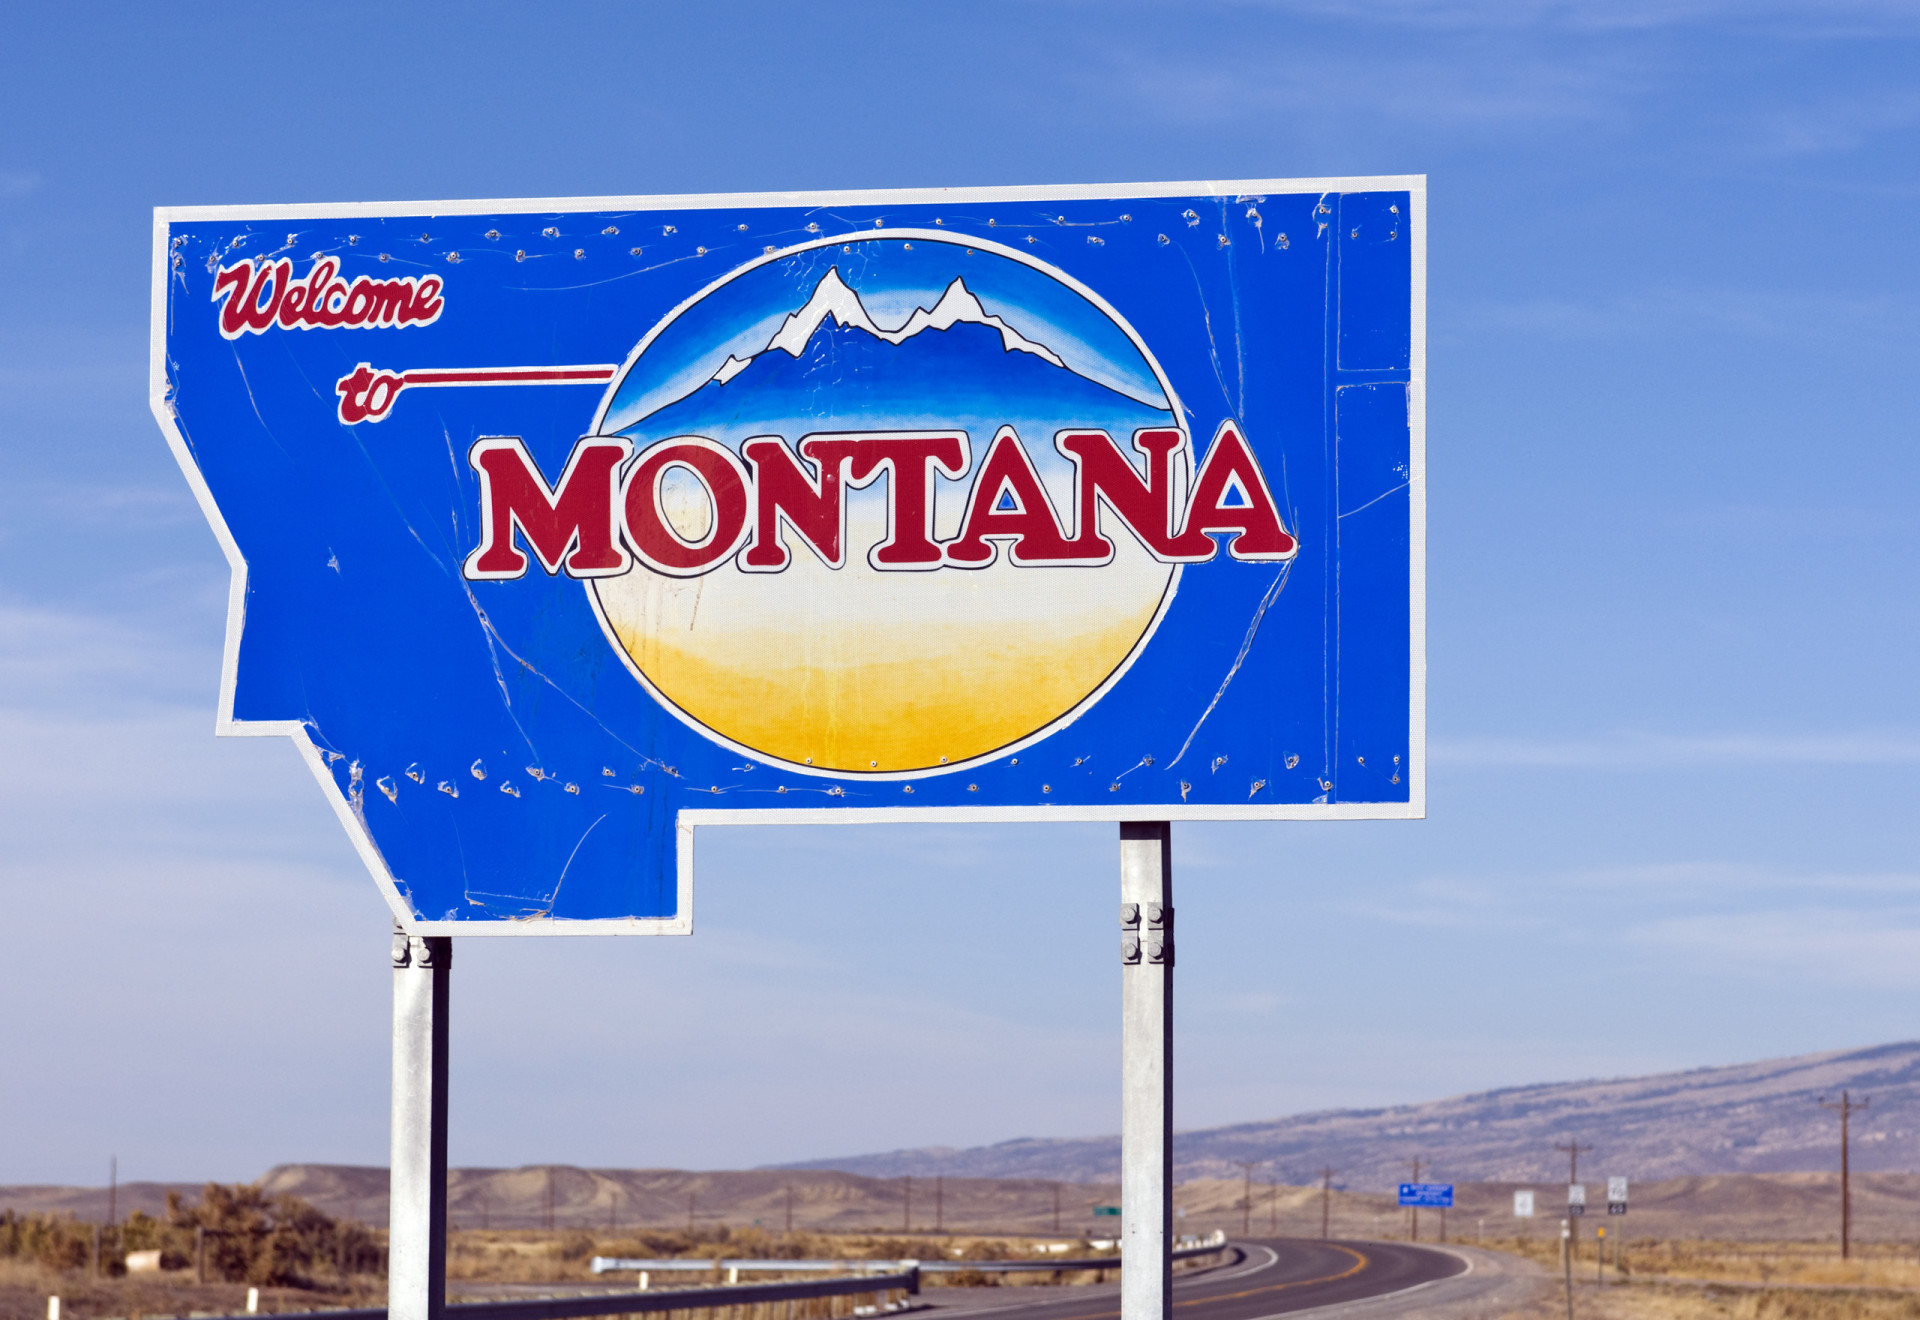 <p>Montana' state welcome sign features a mountain, a reference to the natural beauty of its landscape. </p><p>You may also like:<a href="https://www.starsinsider.com/n/489980?utm_source=msn.com&utm_medium=display&utm_campaign=referral_description&utm_content=572689en-en"> Foods that help thin the arteries</a></p>